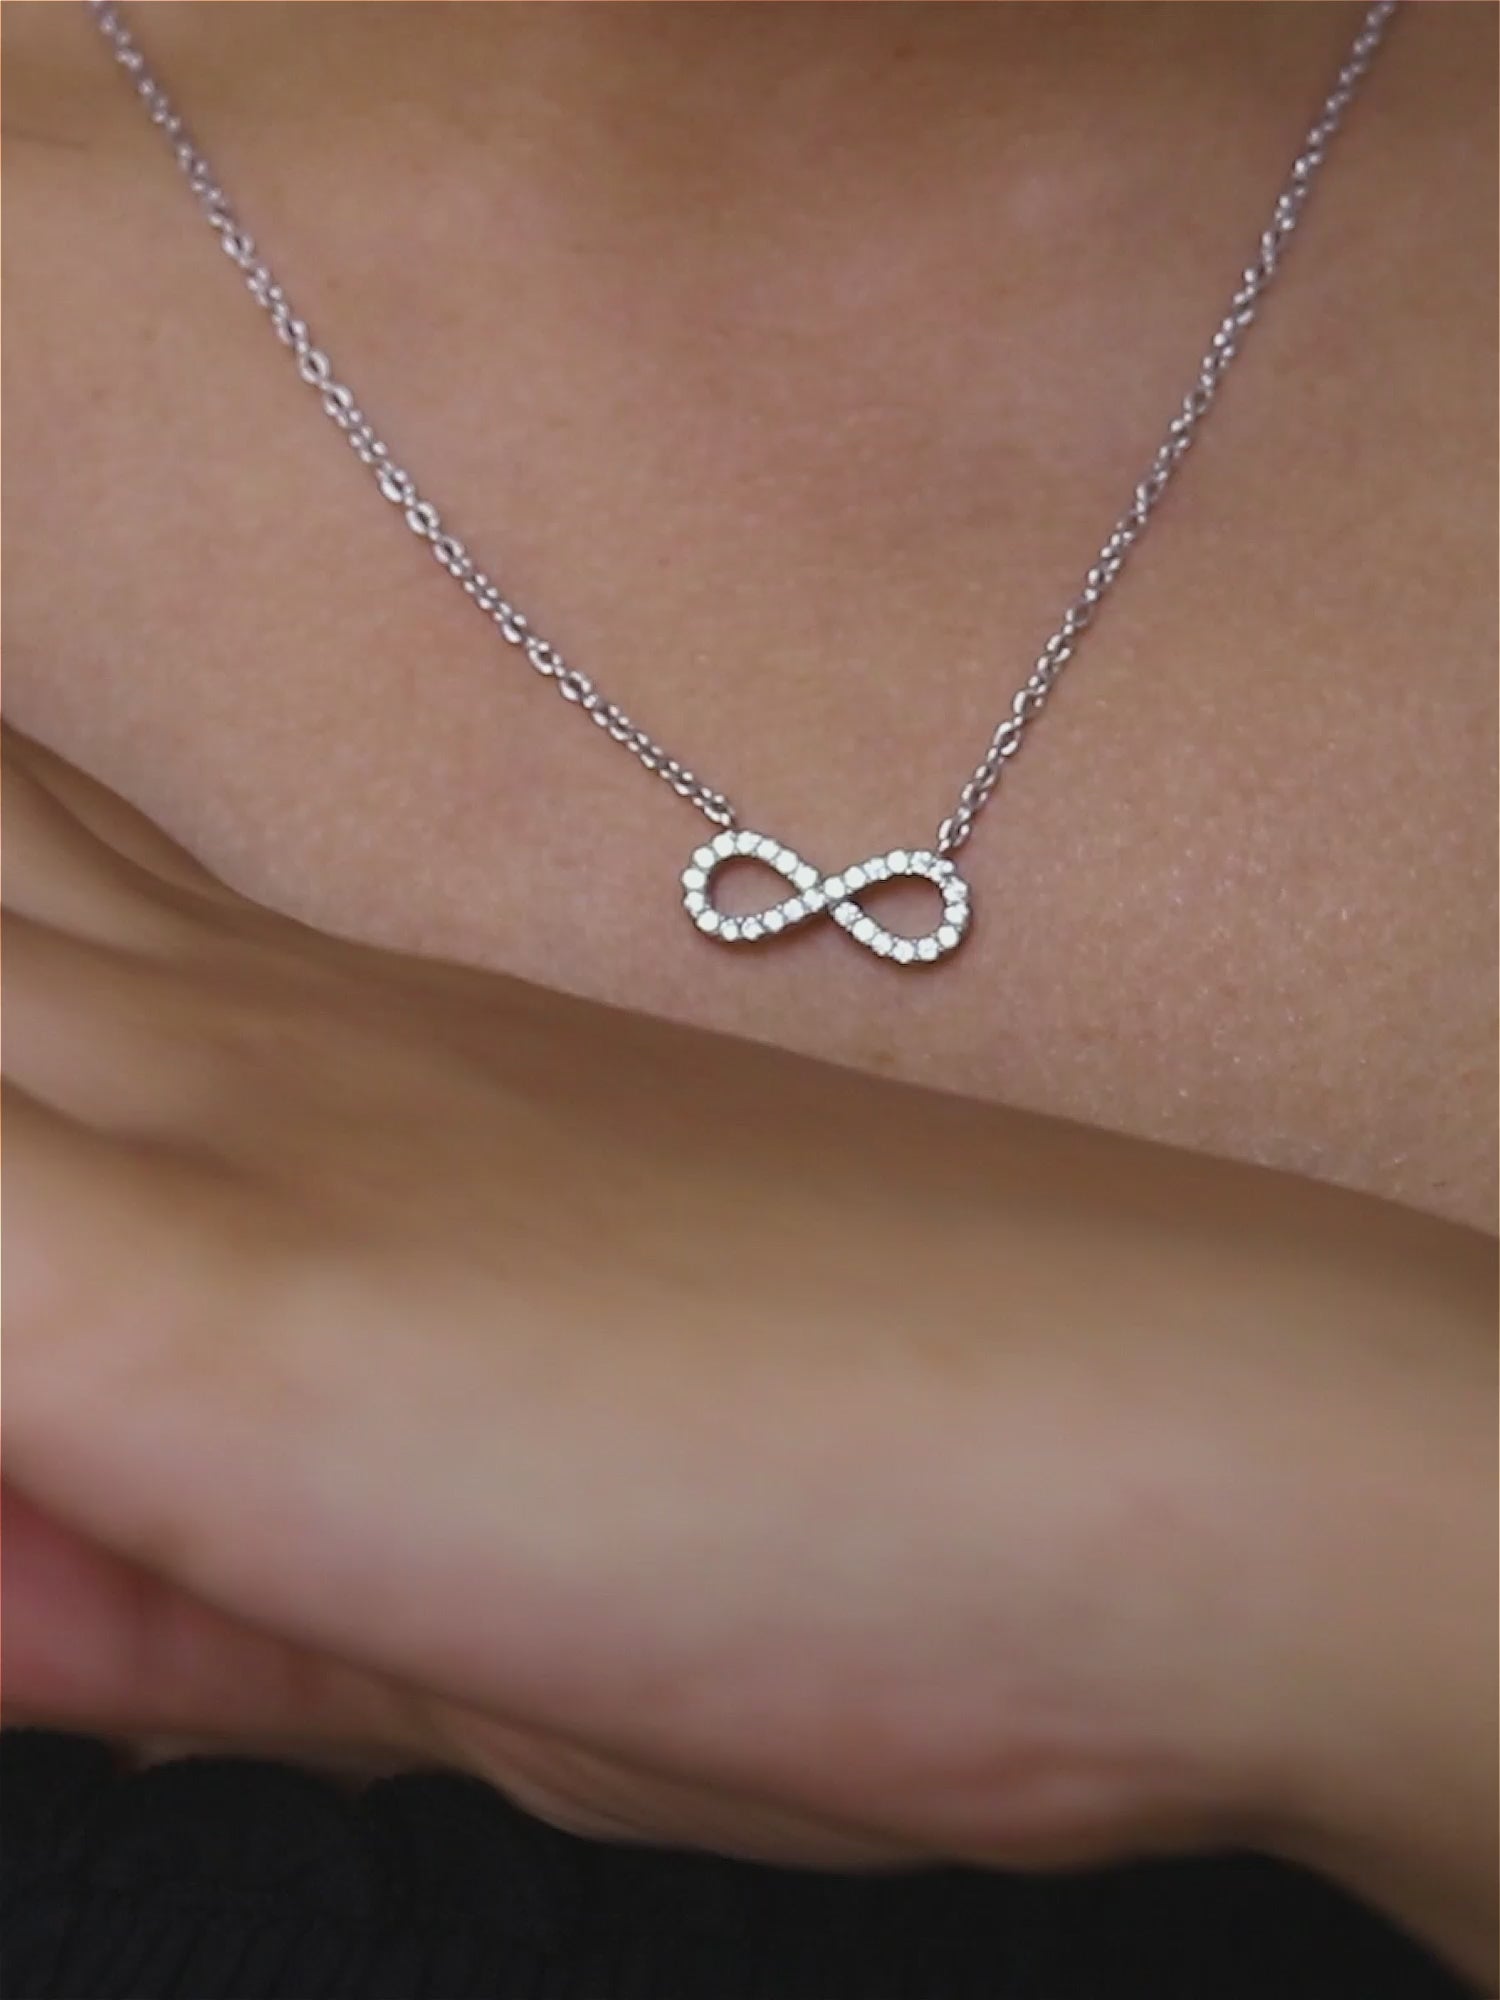 INFINITY DESIGN PENDANT FOR WOMEN WITH CHAIN